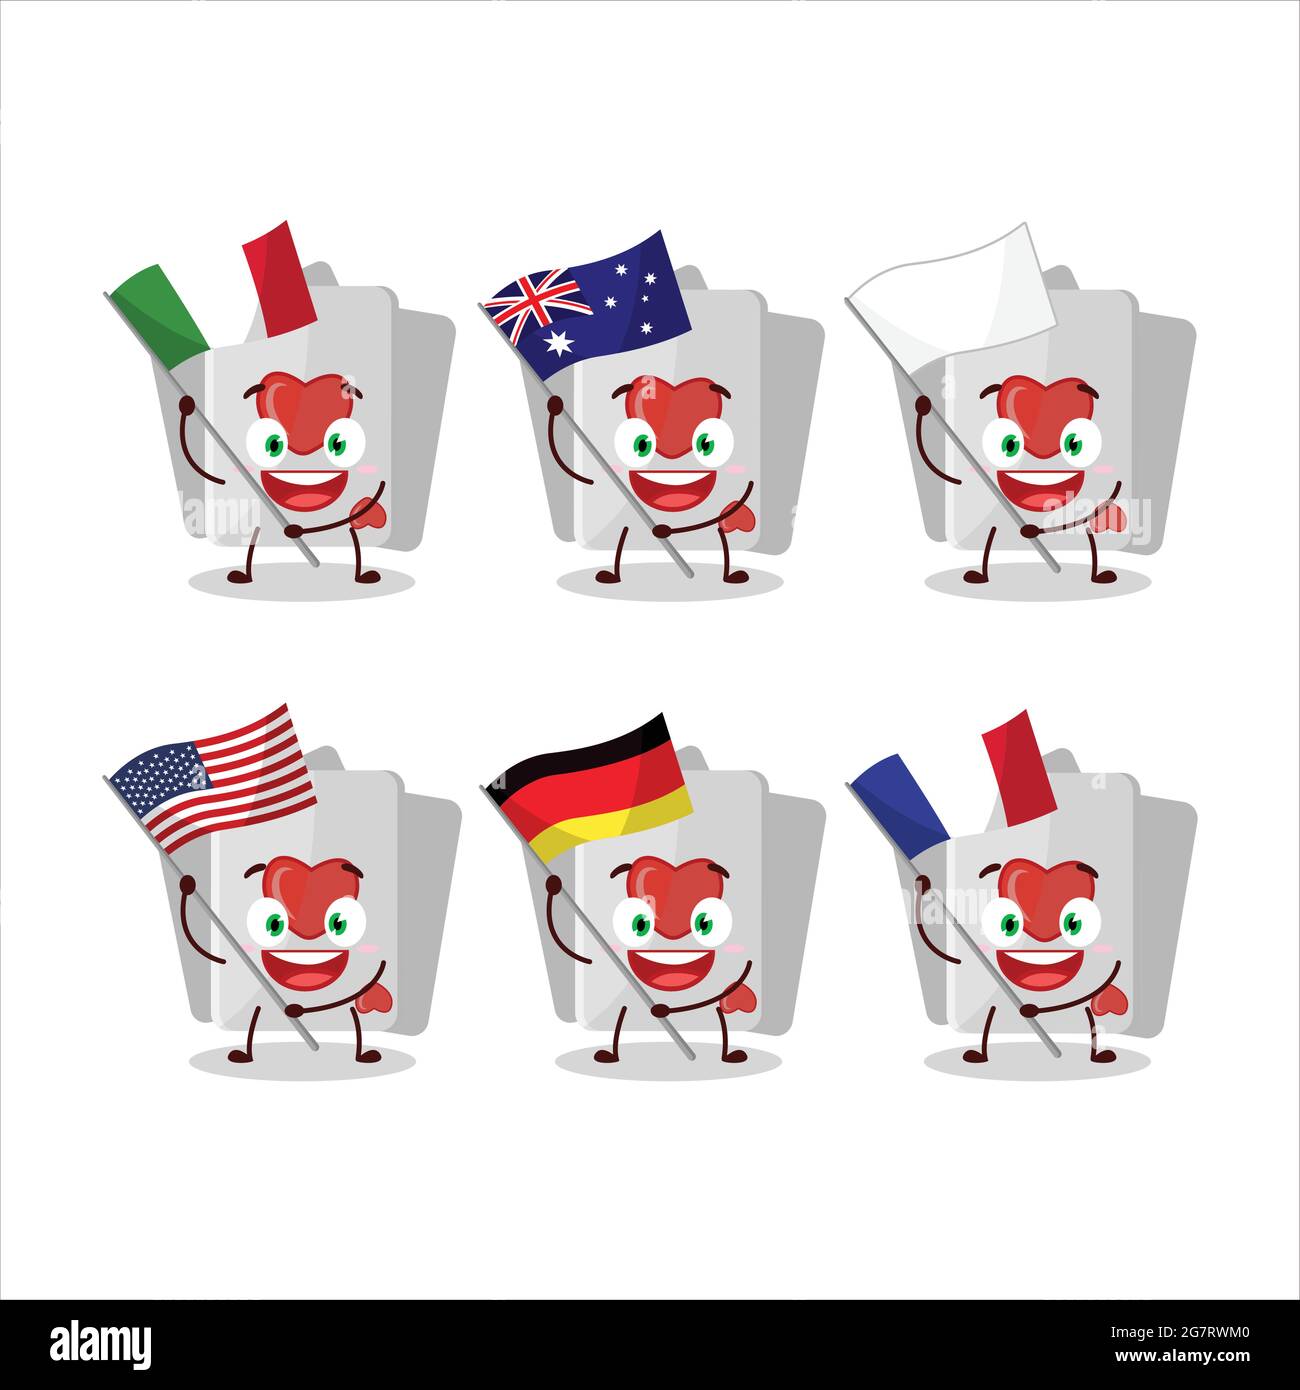 Remi card love cartoon character bring the flags of various countries. Vector illustration Stock Vector